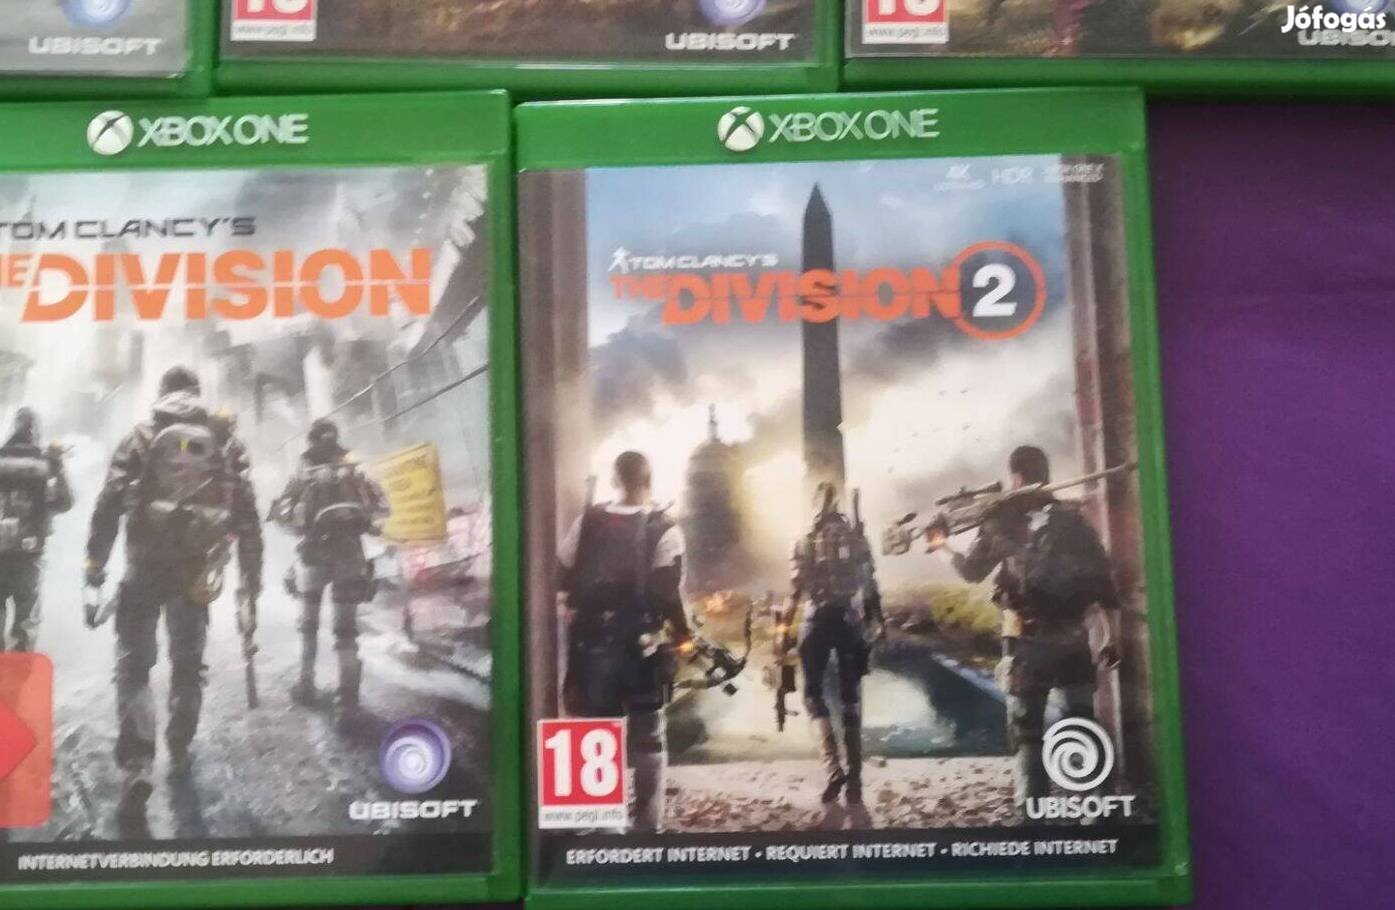 Division 2 (Xbox One)